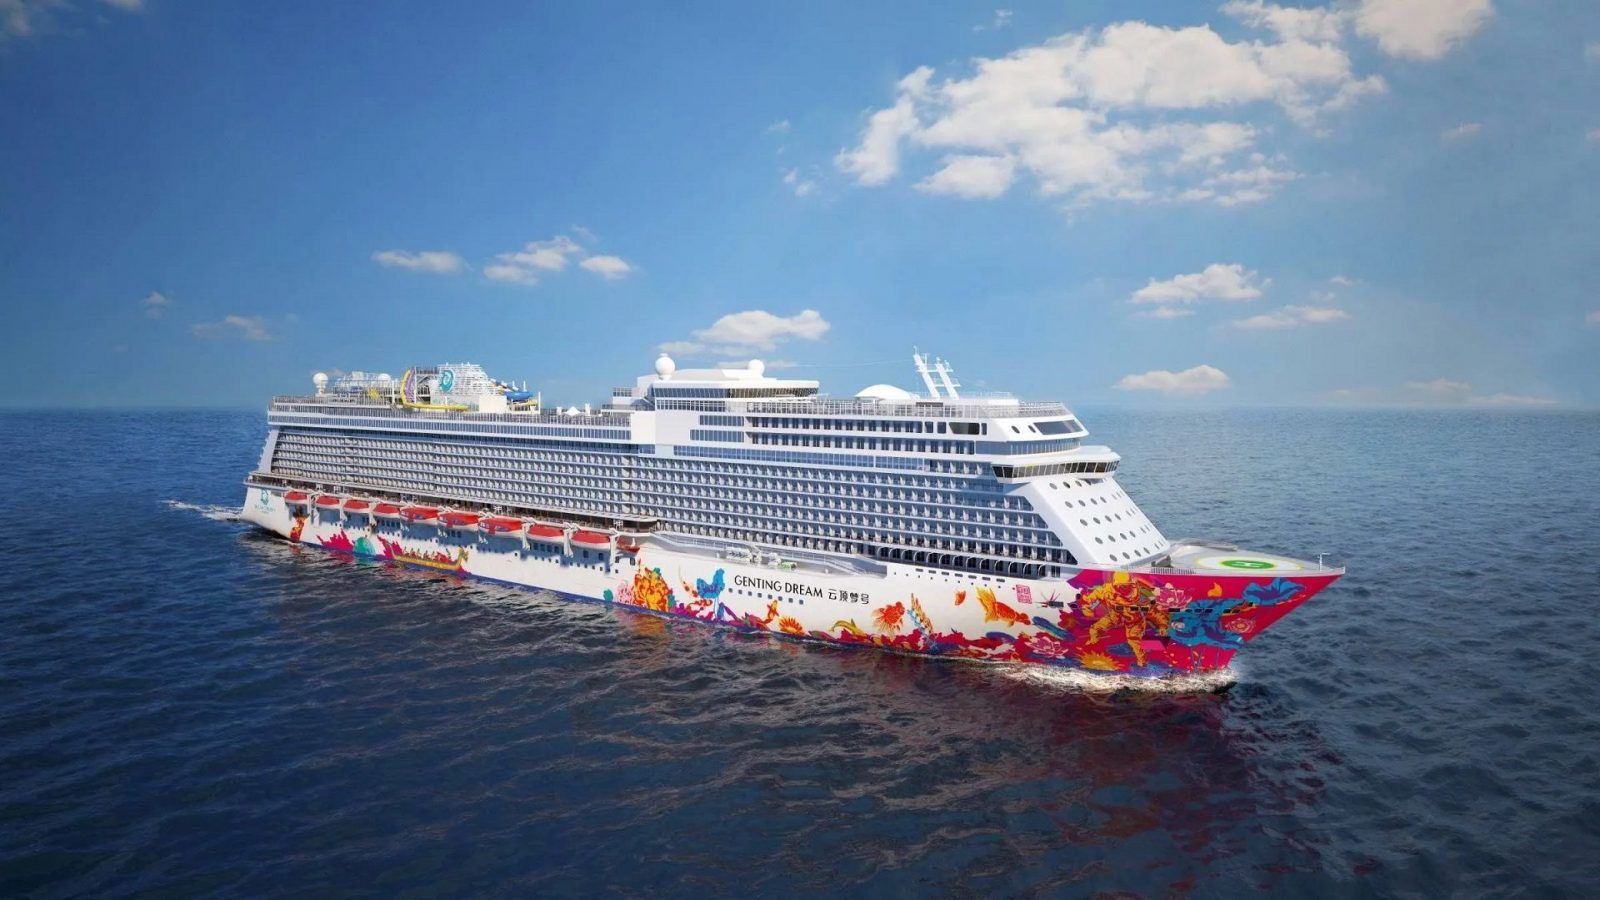 Cruise to Bintan and Batam from Singapore with Genting Dream from 1 July